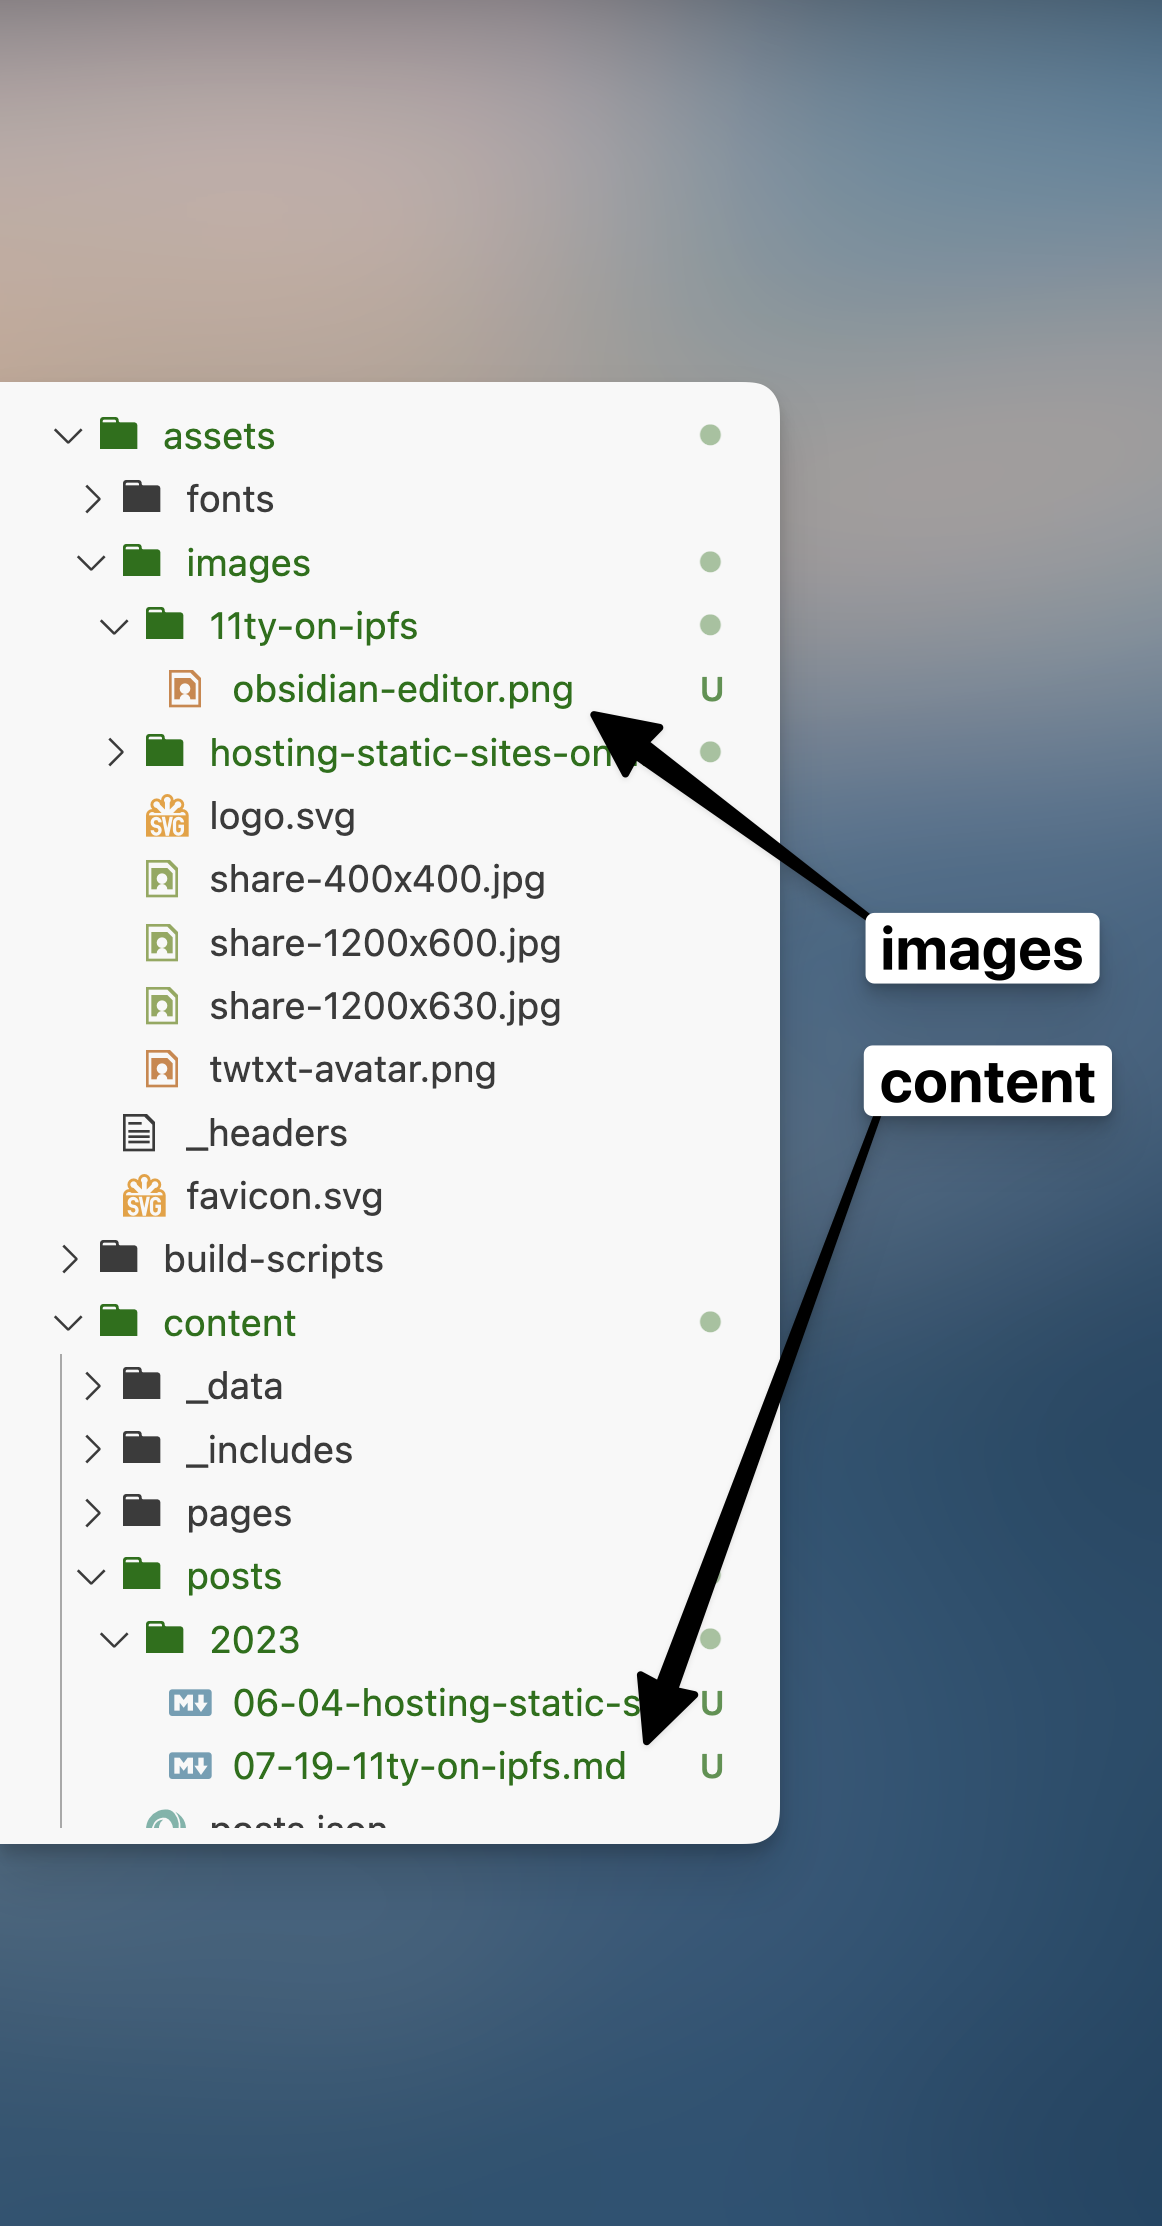 vscode showing the file structure of the blog